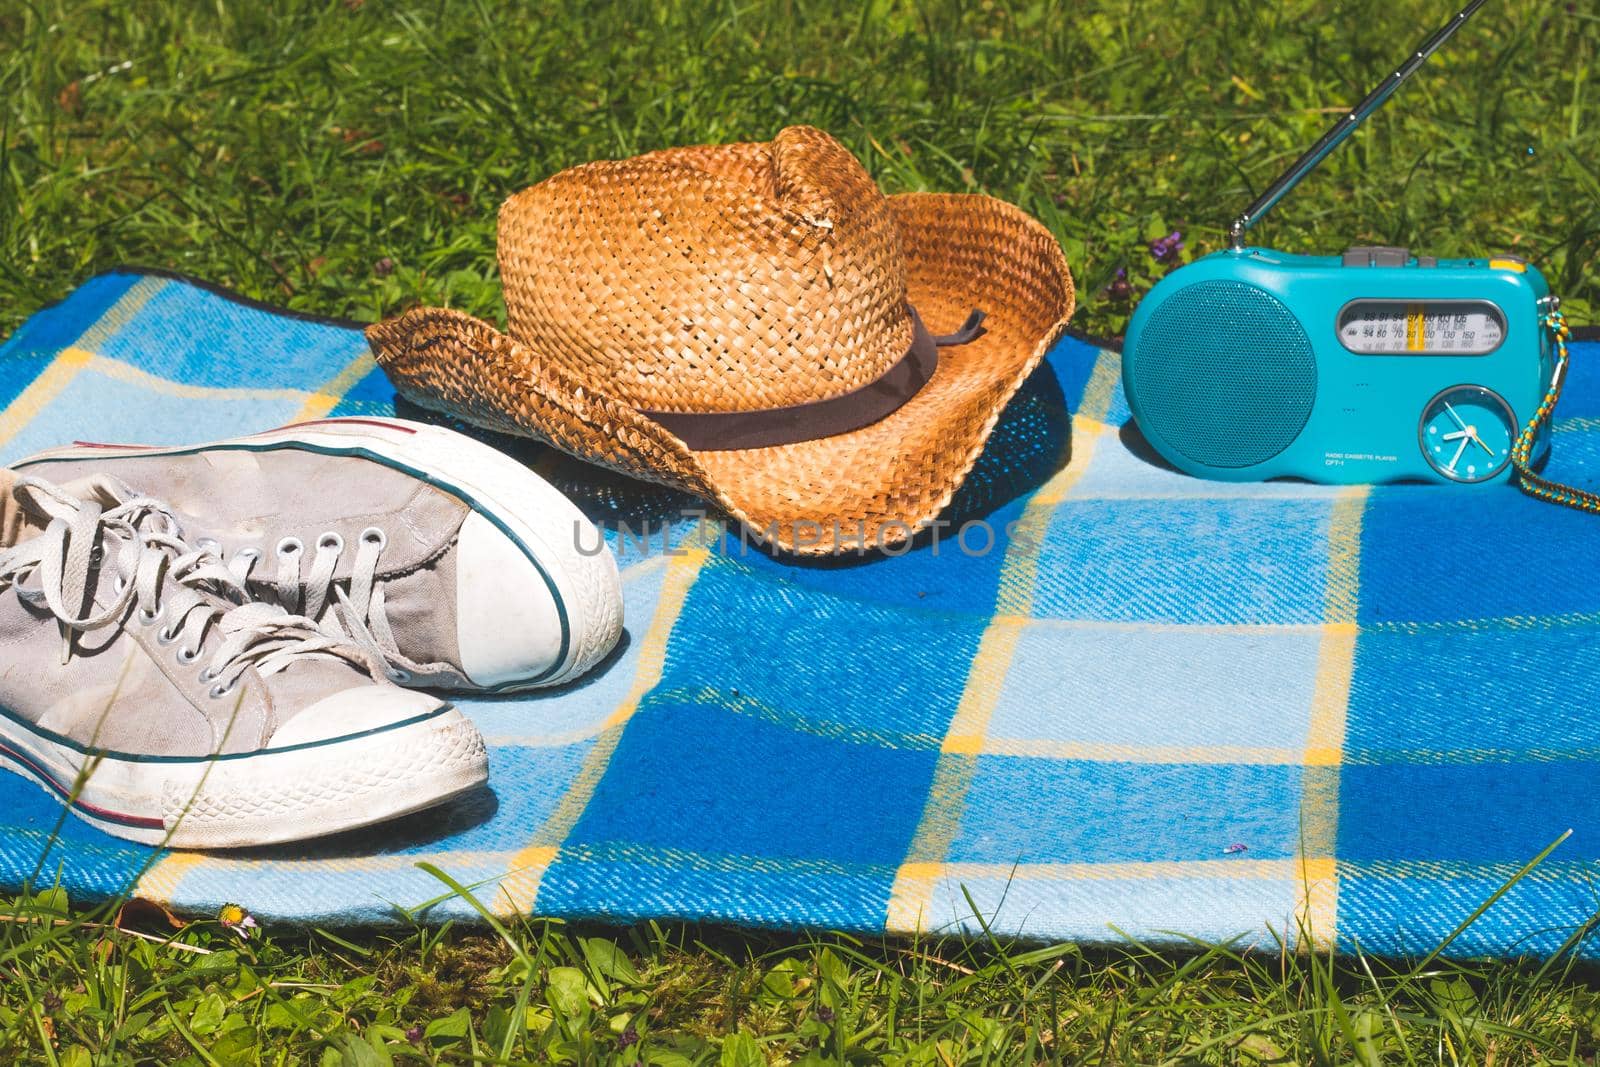 Picnic blanket with sneakers, straw hat, and radio